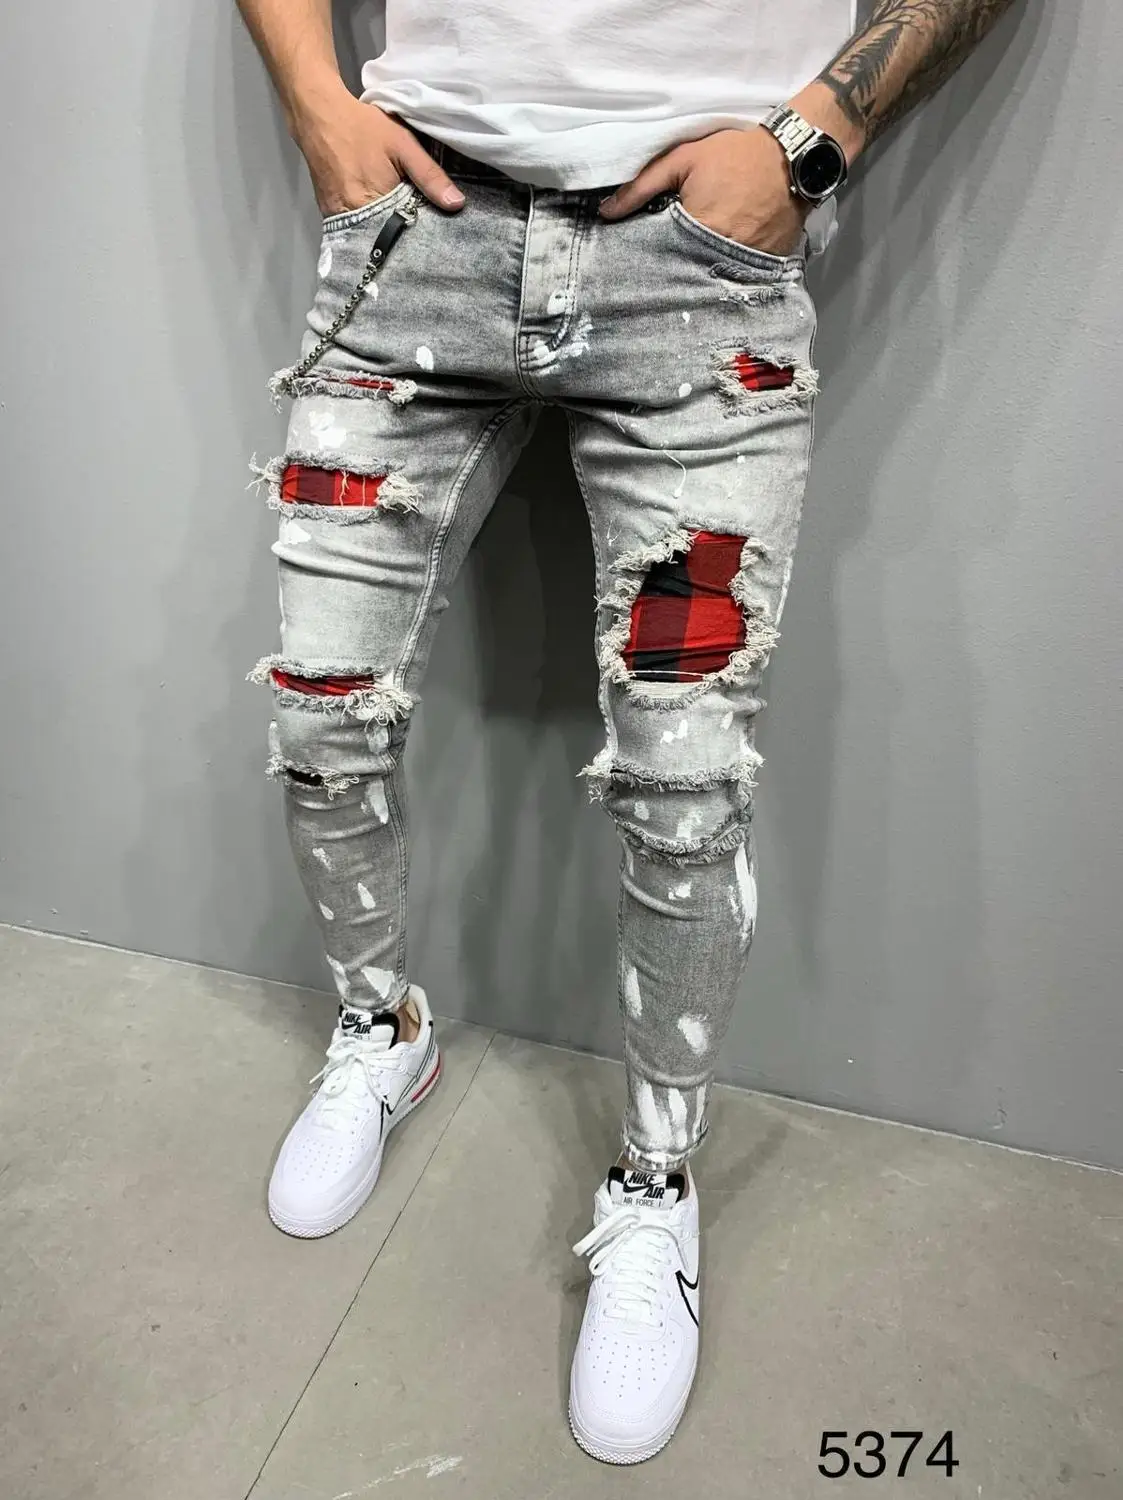 2020 New Fashion Men's Ripped Jeans Slim Spray Painted Hip Hop Denim Pencil  Pants Spring And Autumn Male Jeans S-3xl - Jeans - AliExpress